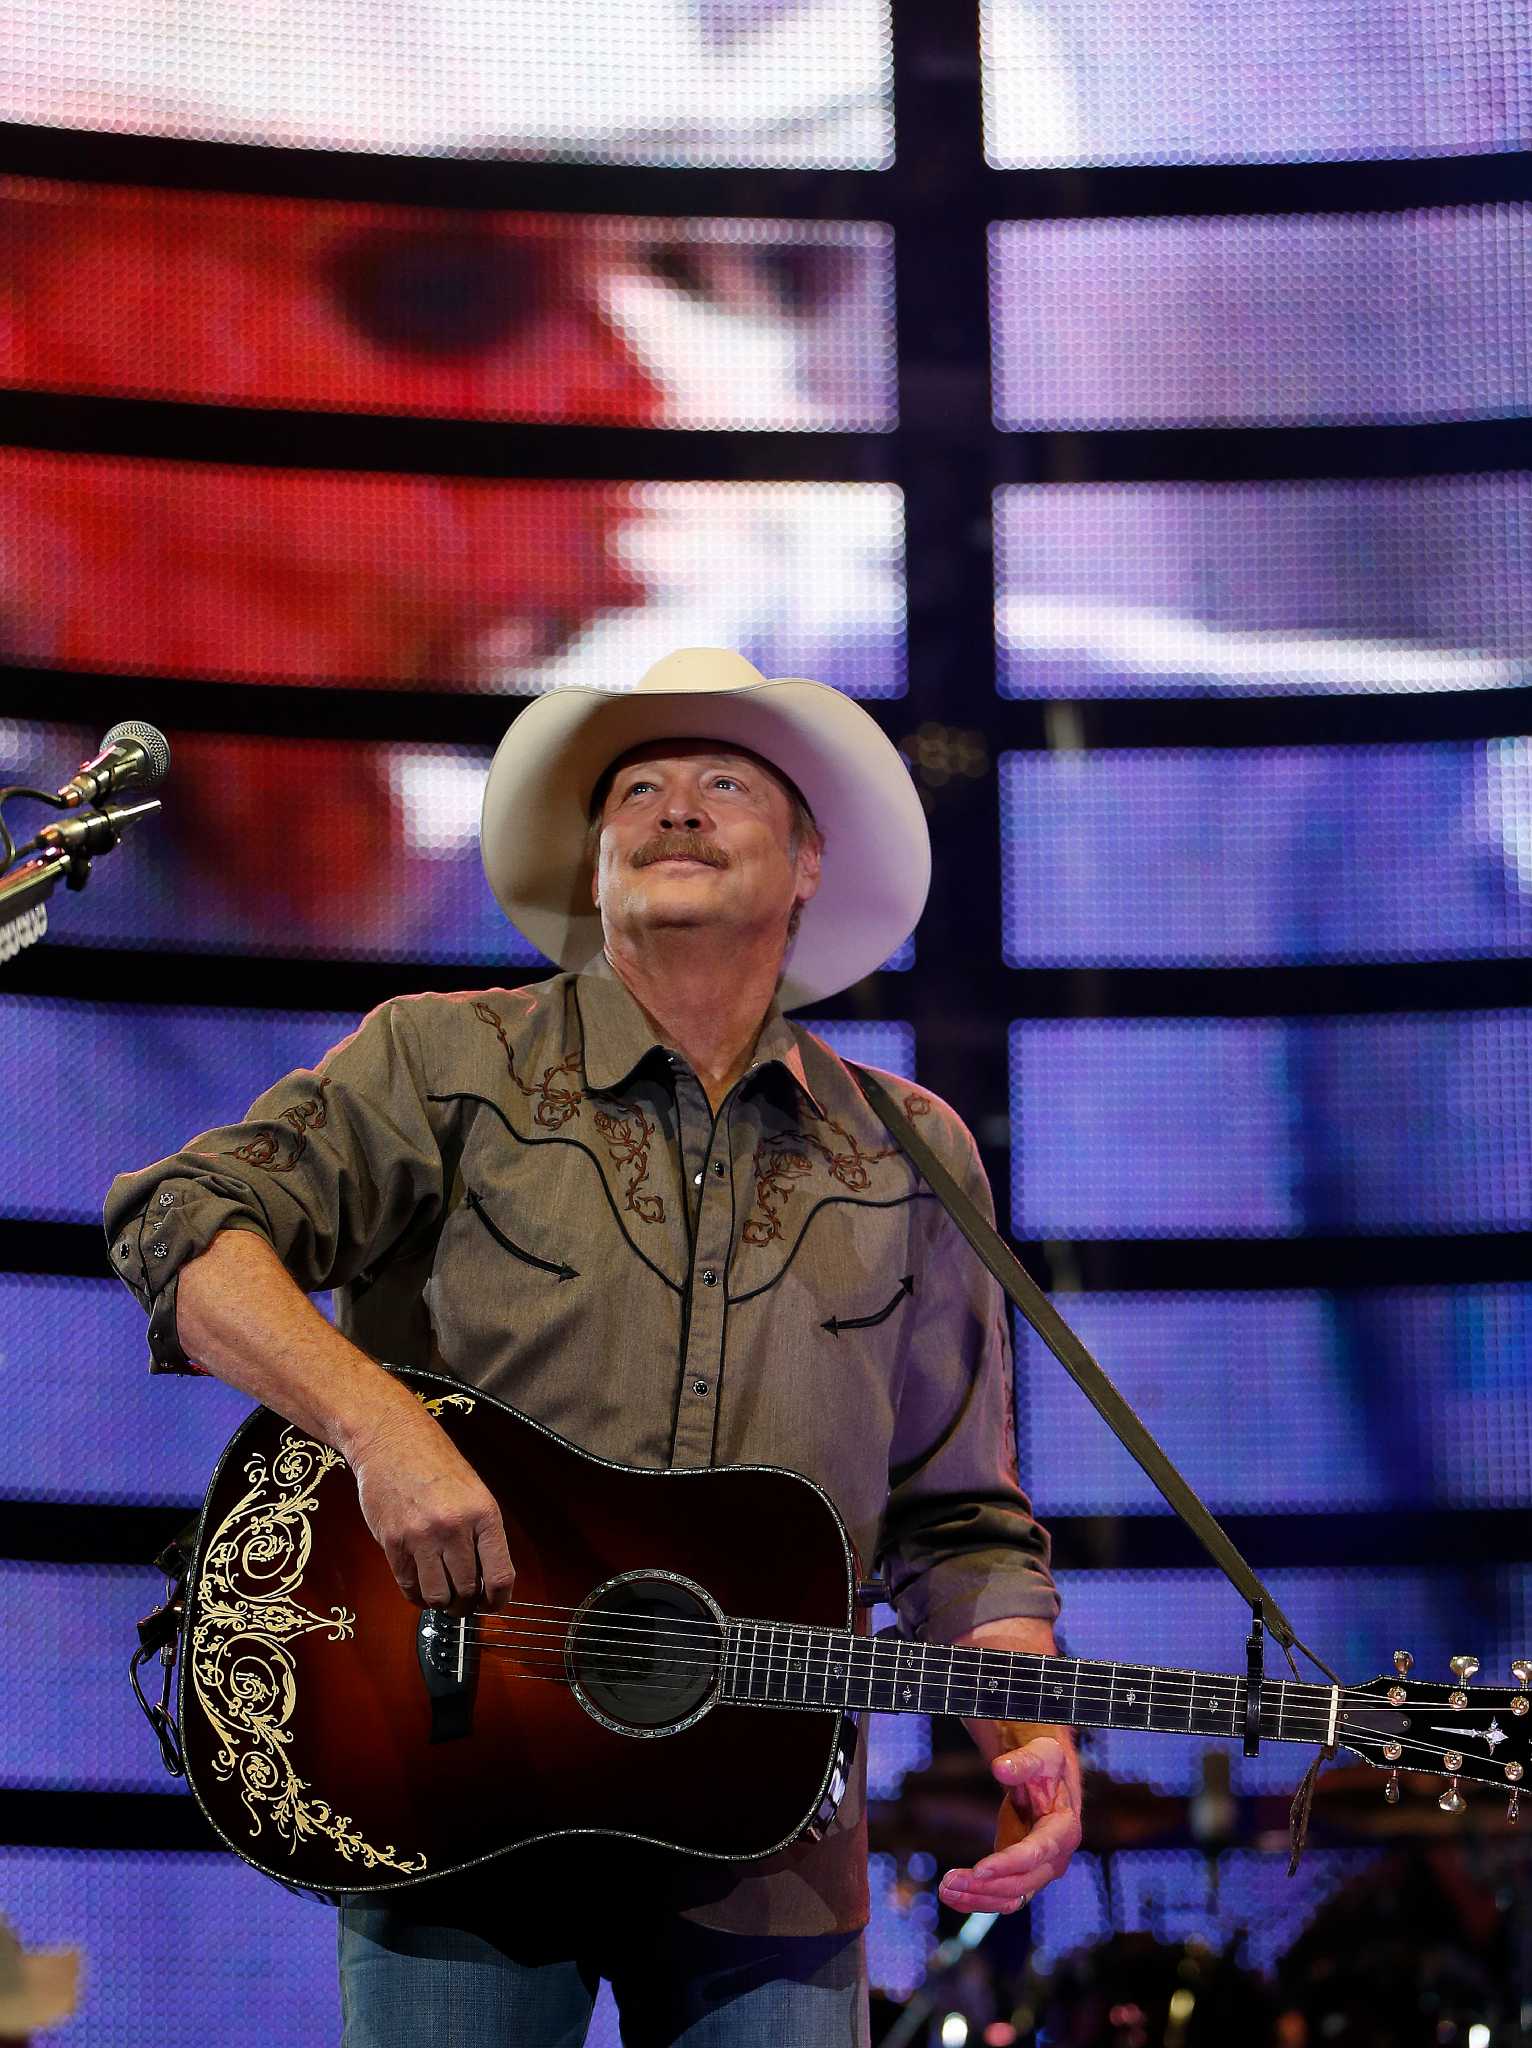 It's not the first rodeo for the charming Alan Jackson